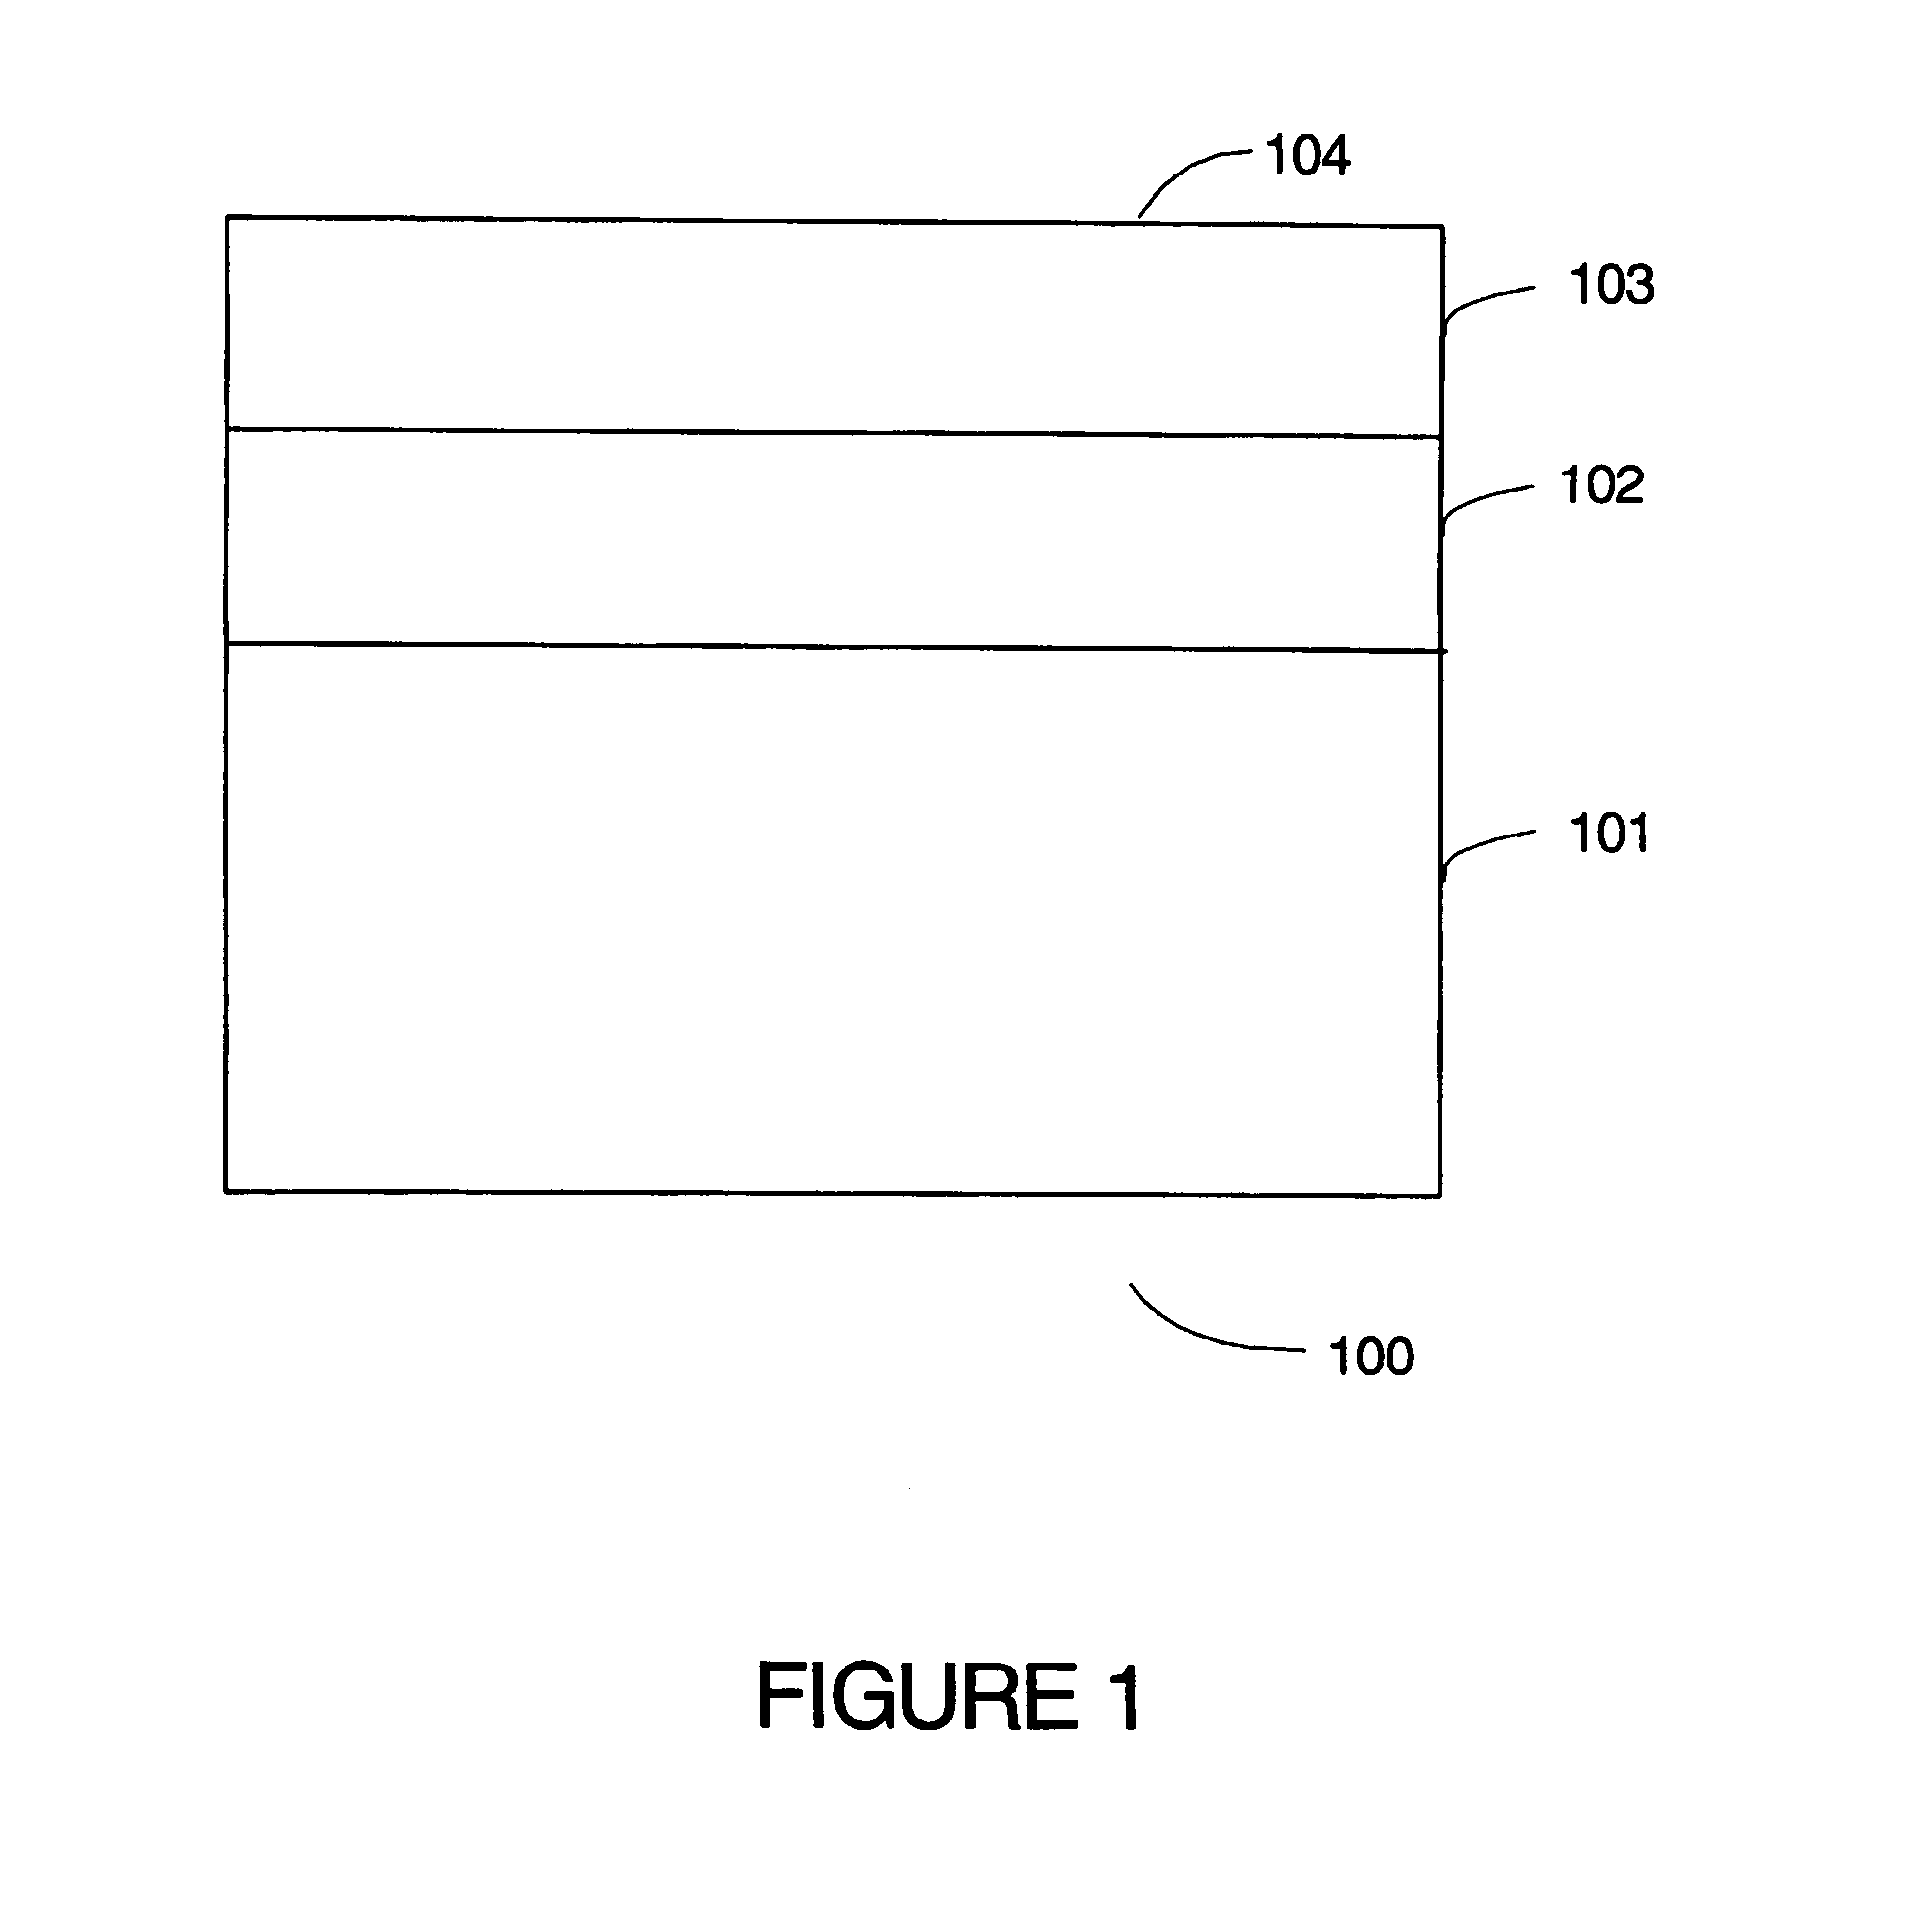 Polycrystalline diamond compact (PDC) cutting element having multiple catalytic elements